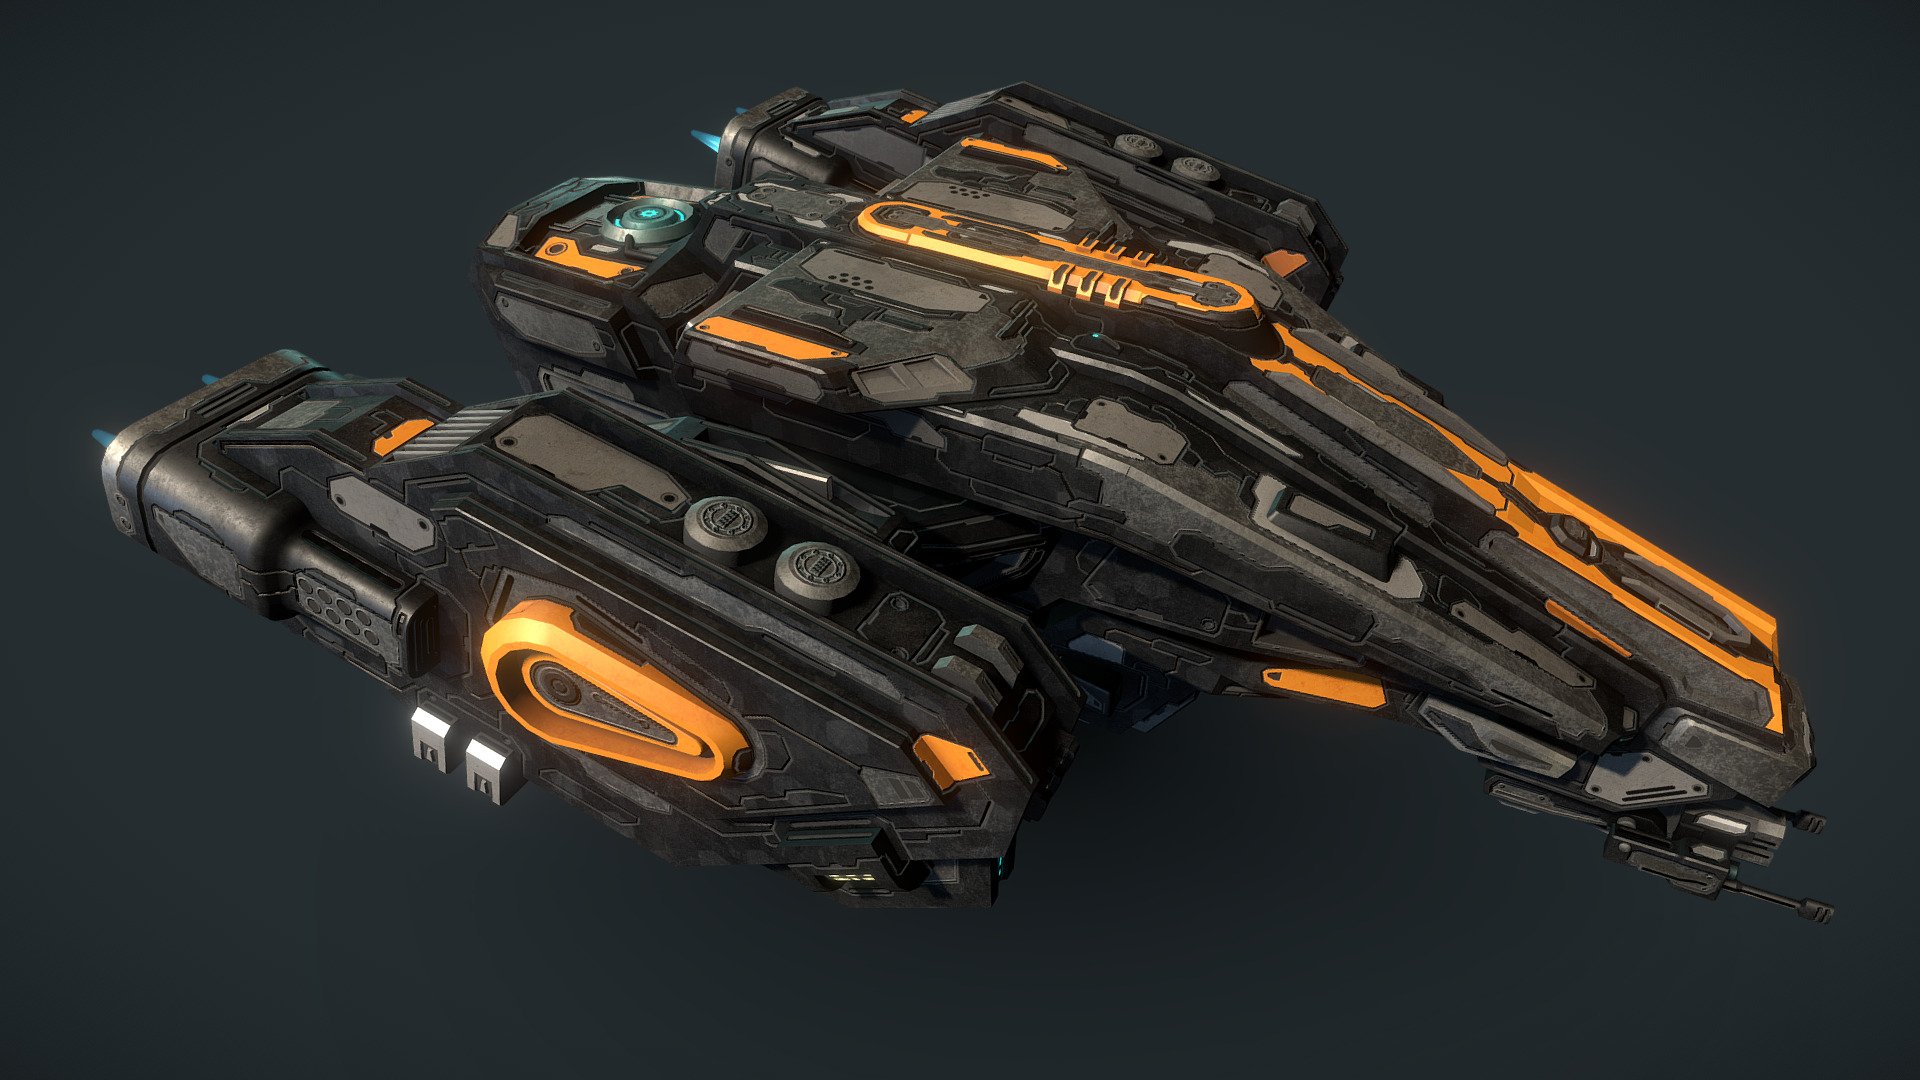 Spaceship made with 3DsMax and 3DCoat 2022. Made in low poly and optimized for video games, virtual reality.
Metalness/roughness workflow in 2K version.

Include files:
- 1 Model .fbx format with 3 mesh: part01 / part02 (for spaceship) and reactors

Textures included:
- Part 01 &amp; part 02 (2048px): albedo / ao / emissive / metalness / roughness / normal
- reactors(1024px): albedo / alpha / emissive

Total tris: 19.088
Shaders: 3
Draw call: 3 - Arcblast - Buy Royalty Free 3D model by carlito69 (charles coureau) (@carlito69) 3d model